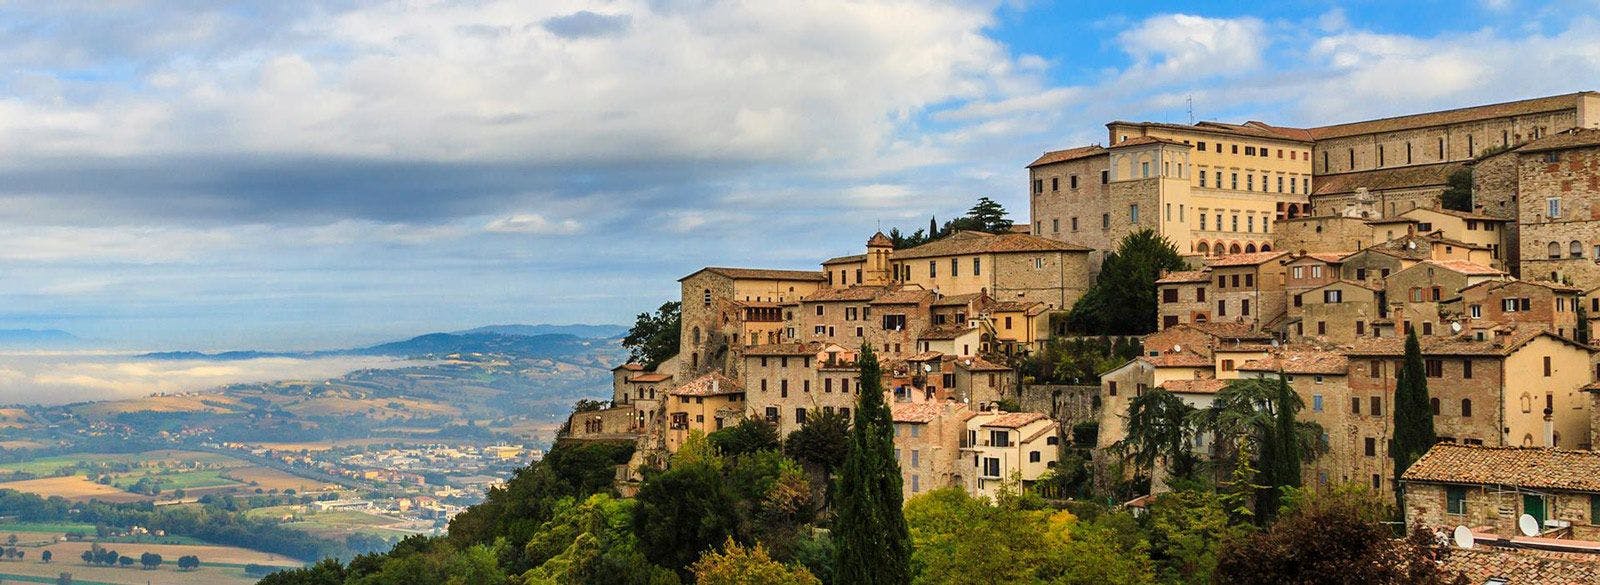 A hilltop town in Umbria overlooking patchwork fields